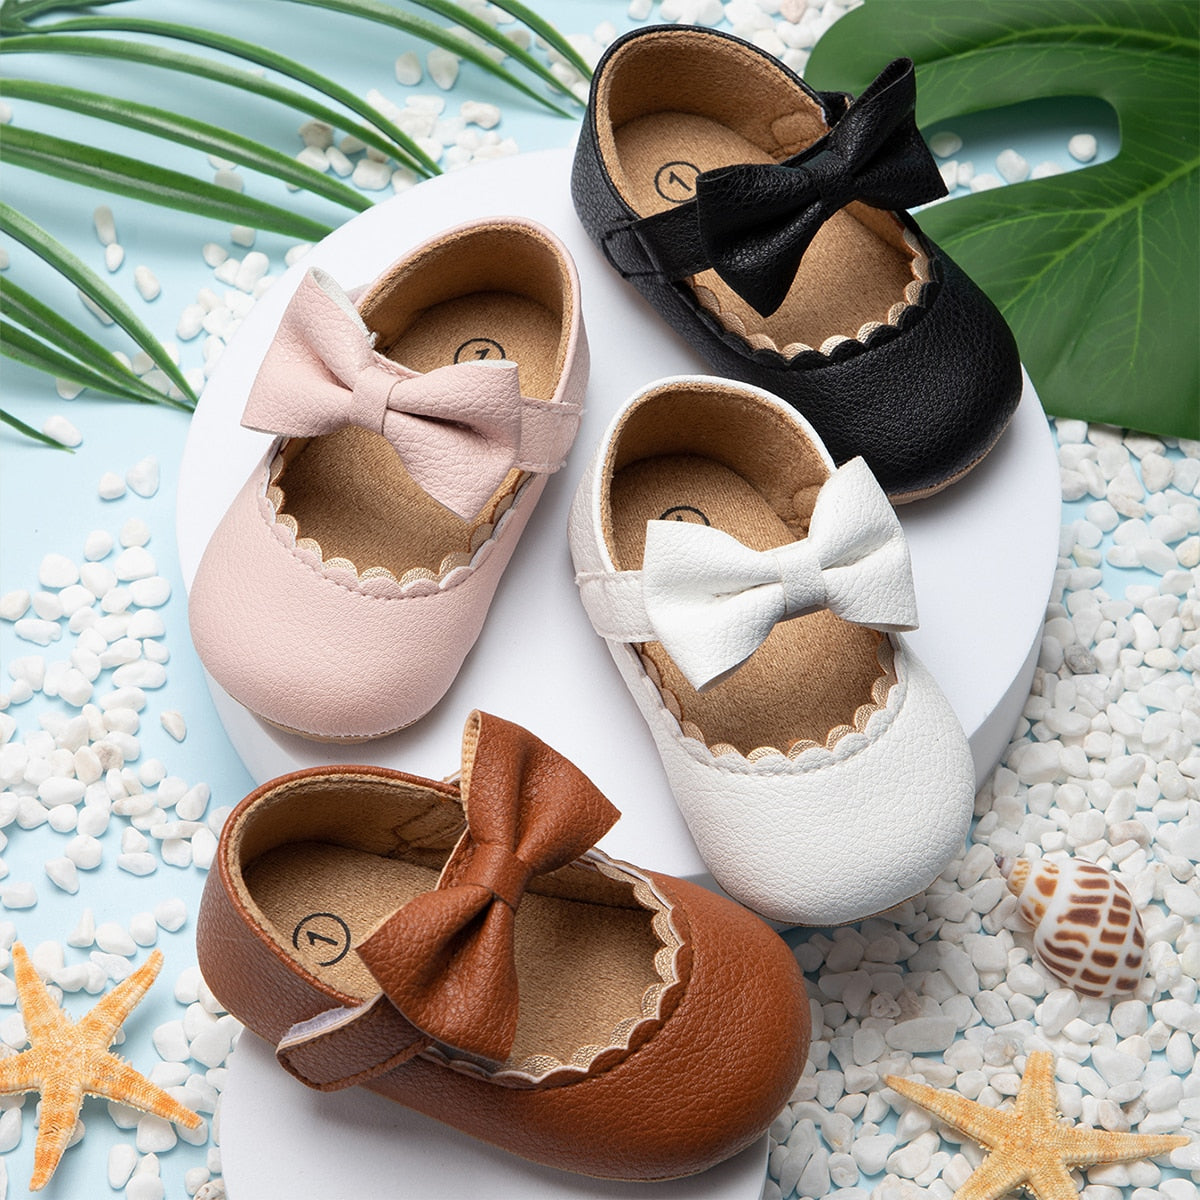 Baby Shoes - Baby Bowknot Non-slip Soft-Sole Shoes